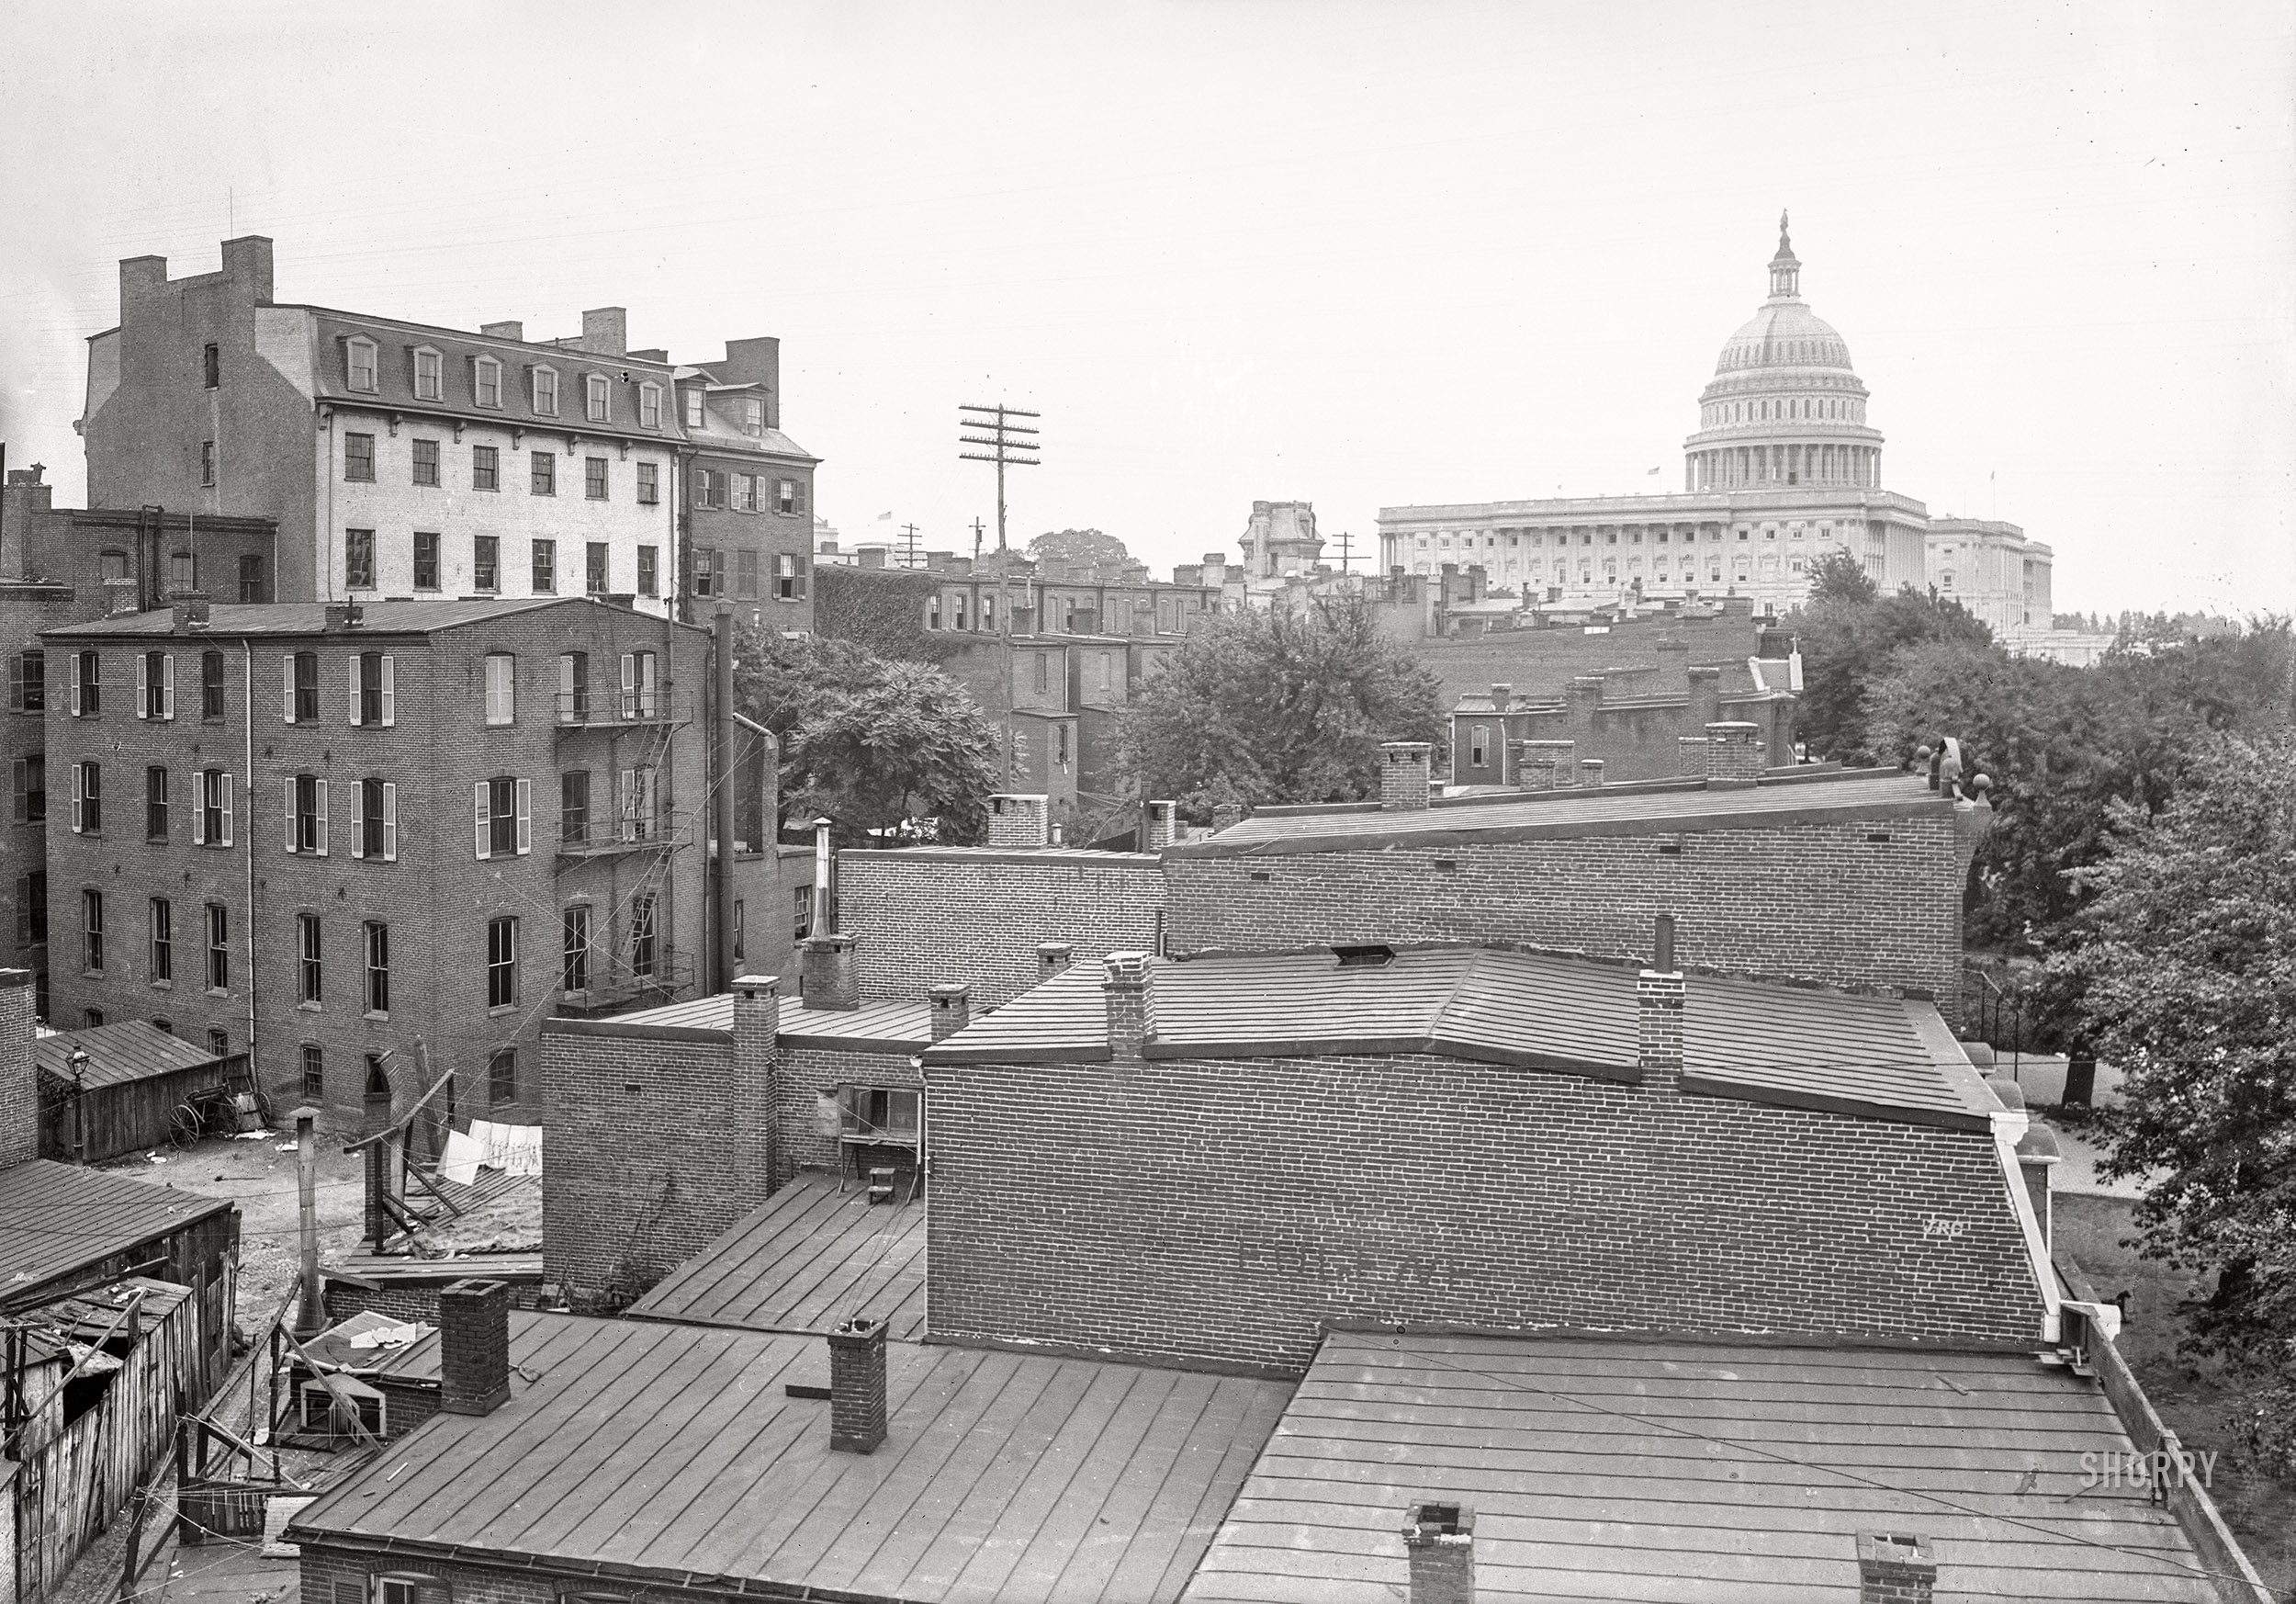 Washington, D.C., 1901. "View of 1st & Delaware N.W., New Jersey Avenue & North Capitol Street N.W., between B & C Streets, probably from Hotel Engel (C & New Jersey), showing rooftops of several buildings and U.S. Capitol in the background. See Z7-23 for fronts of these North Capitol St. bldgs." 5x7 inch glass negative, D.C. Street Survey Collection. View full size.